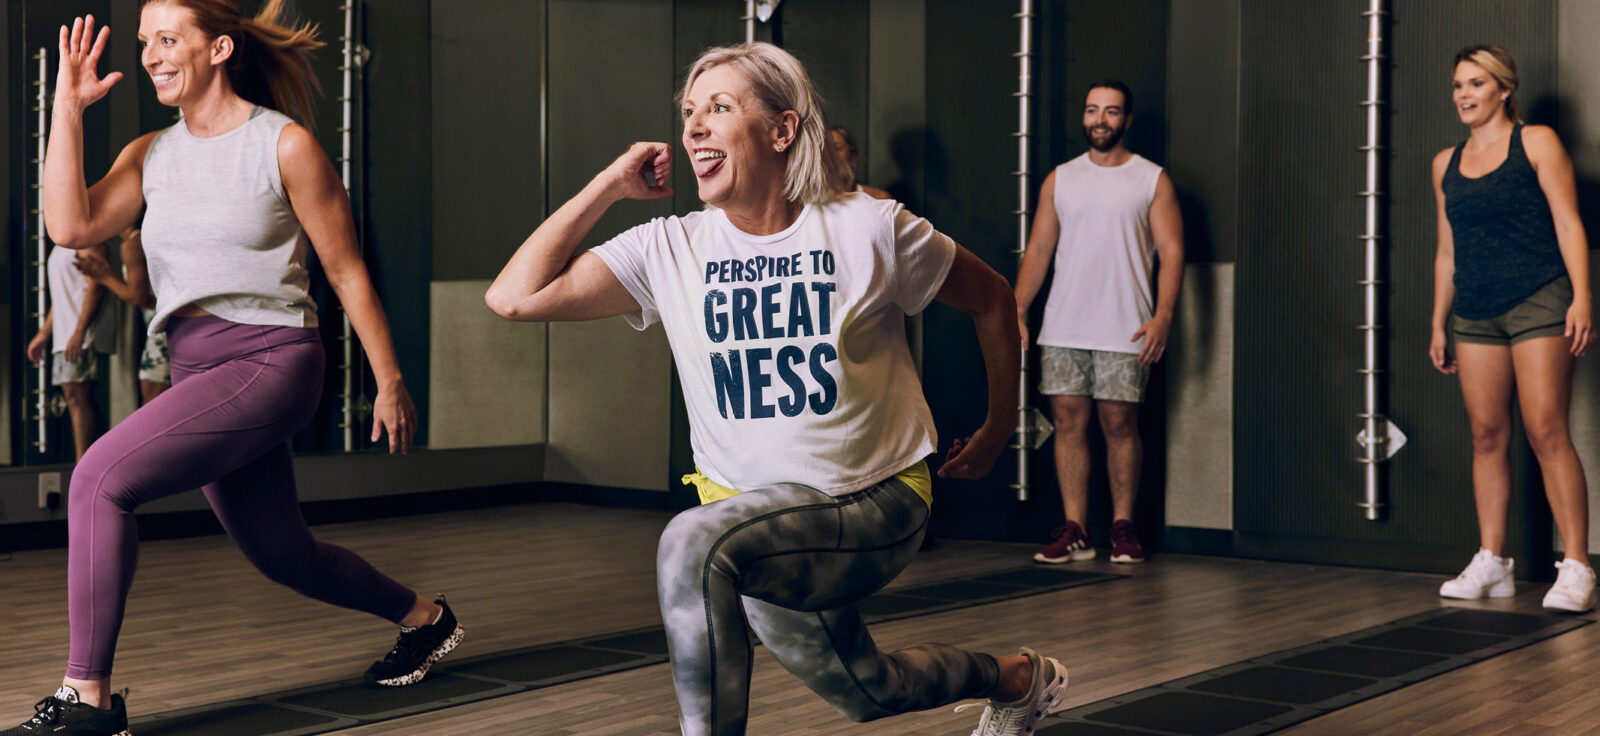 What’s the Best Gym Membership With Group Classes? Crunch Fitness vs. LA Fitness